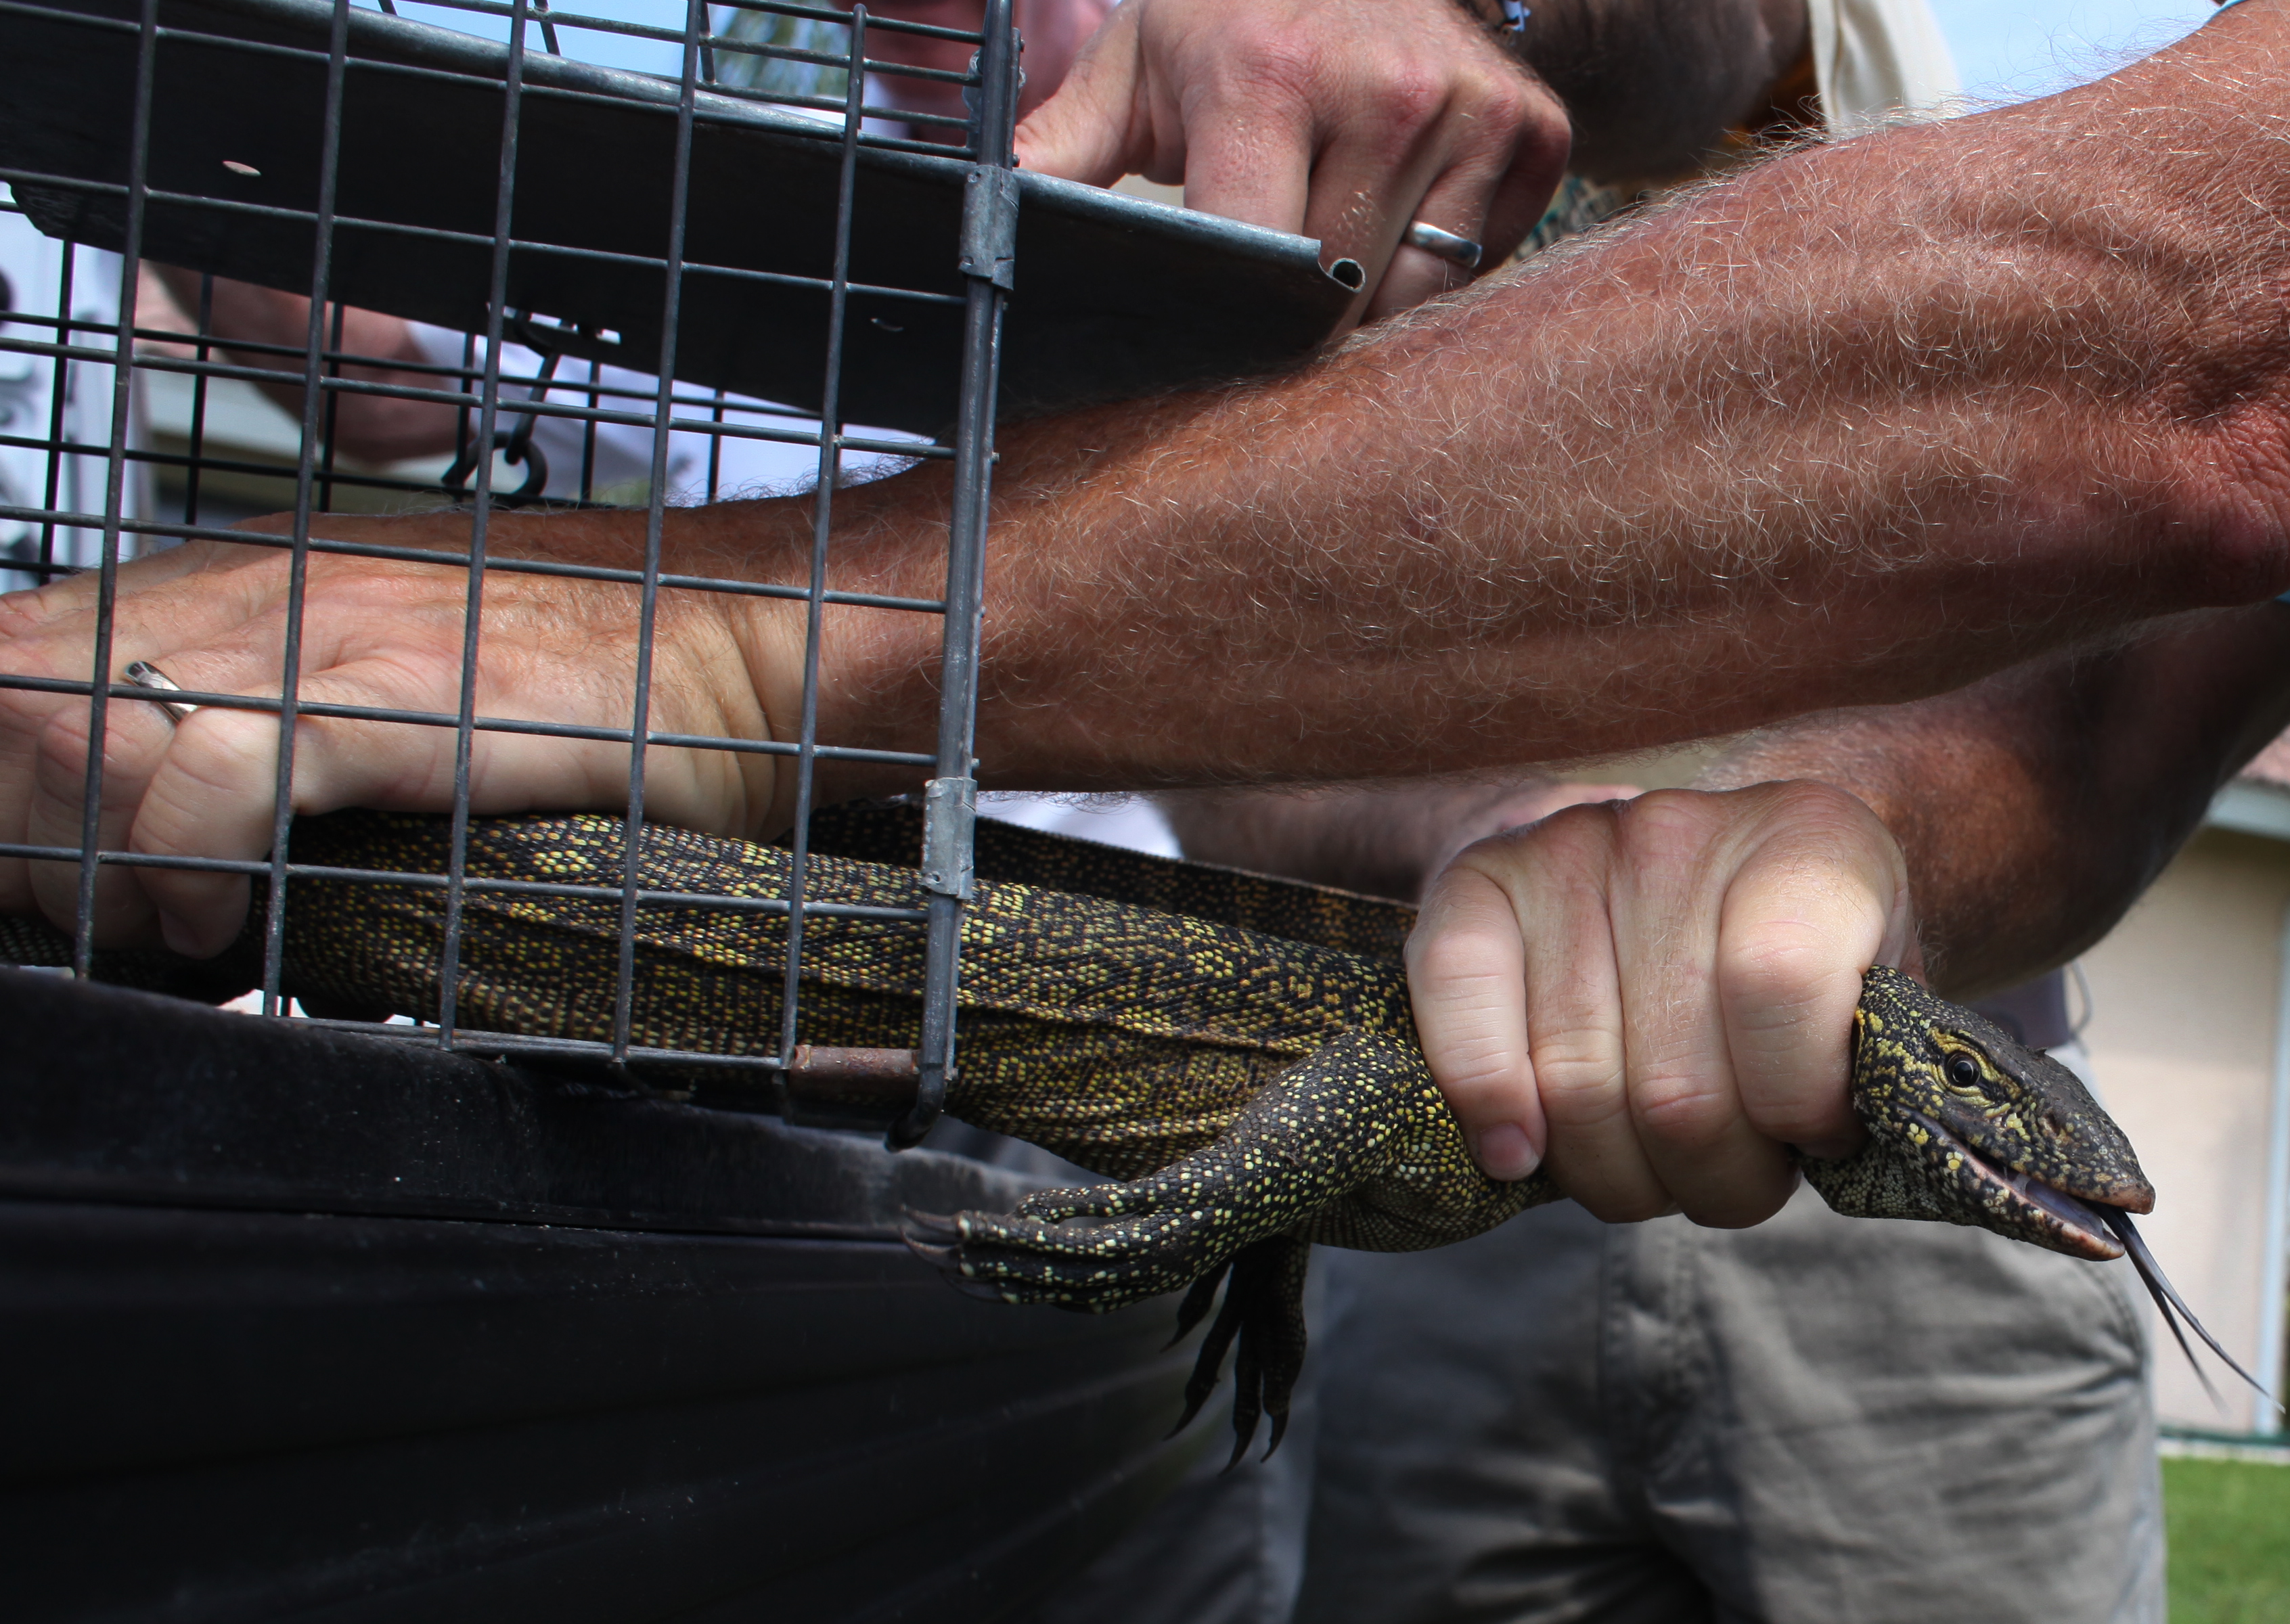 Nile monitor lizards, the aggressive, invasive beasts will eat